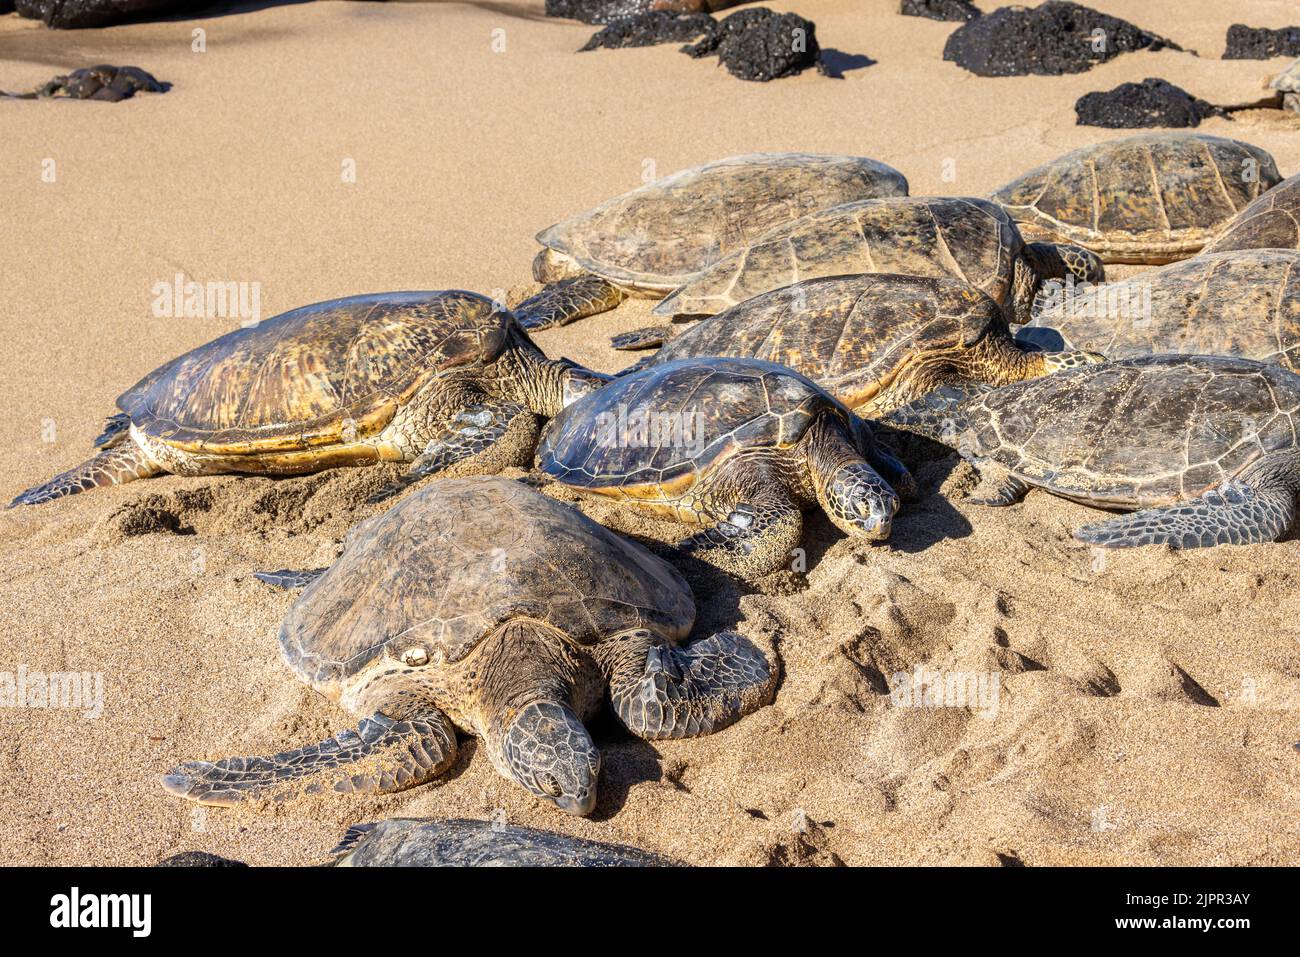 A group of green sea turtles, Chelonia mydas, an endangered species, gather at a secluded patch of beach off West Maui, Hawaii. Stock Photo